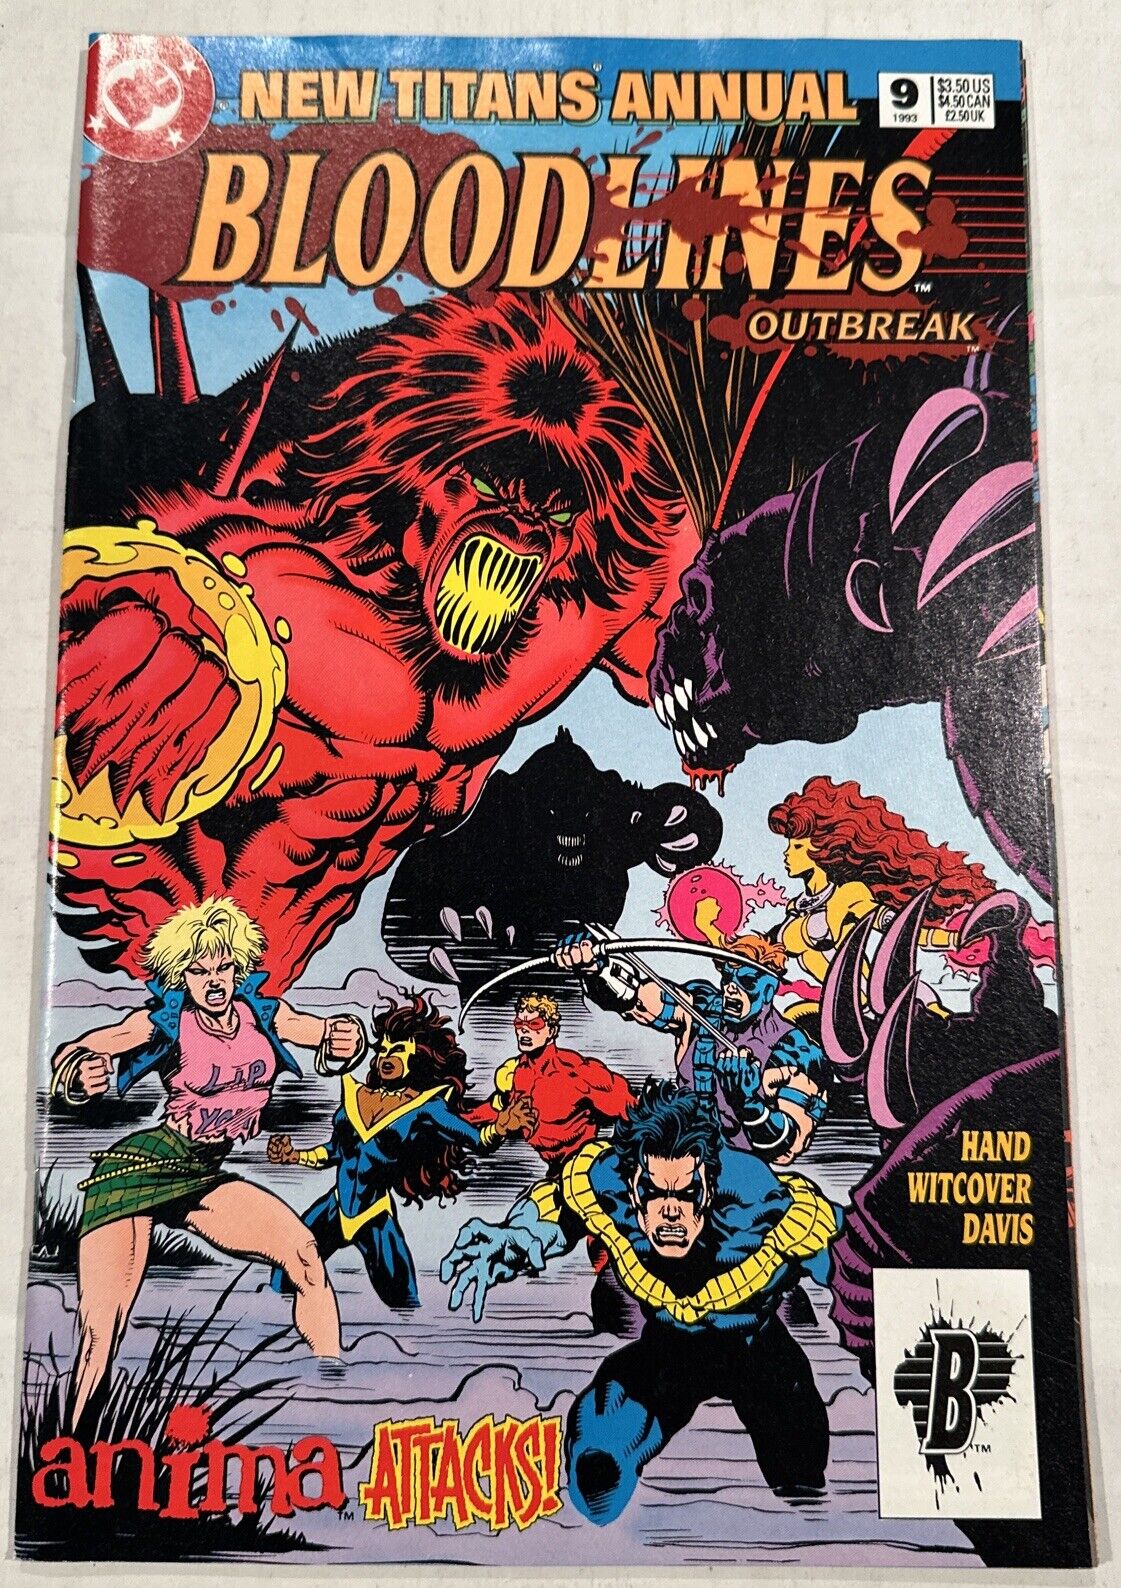 New Titans Annual #9 1993 DC Bloodlines Outbreak-Paul Witcover Hand Davis